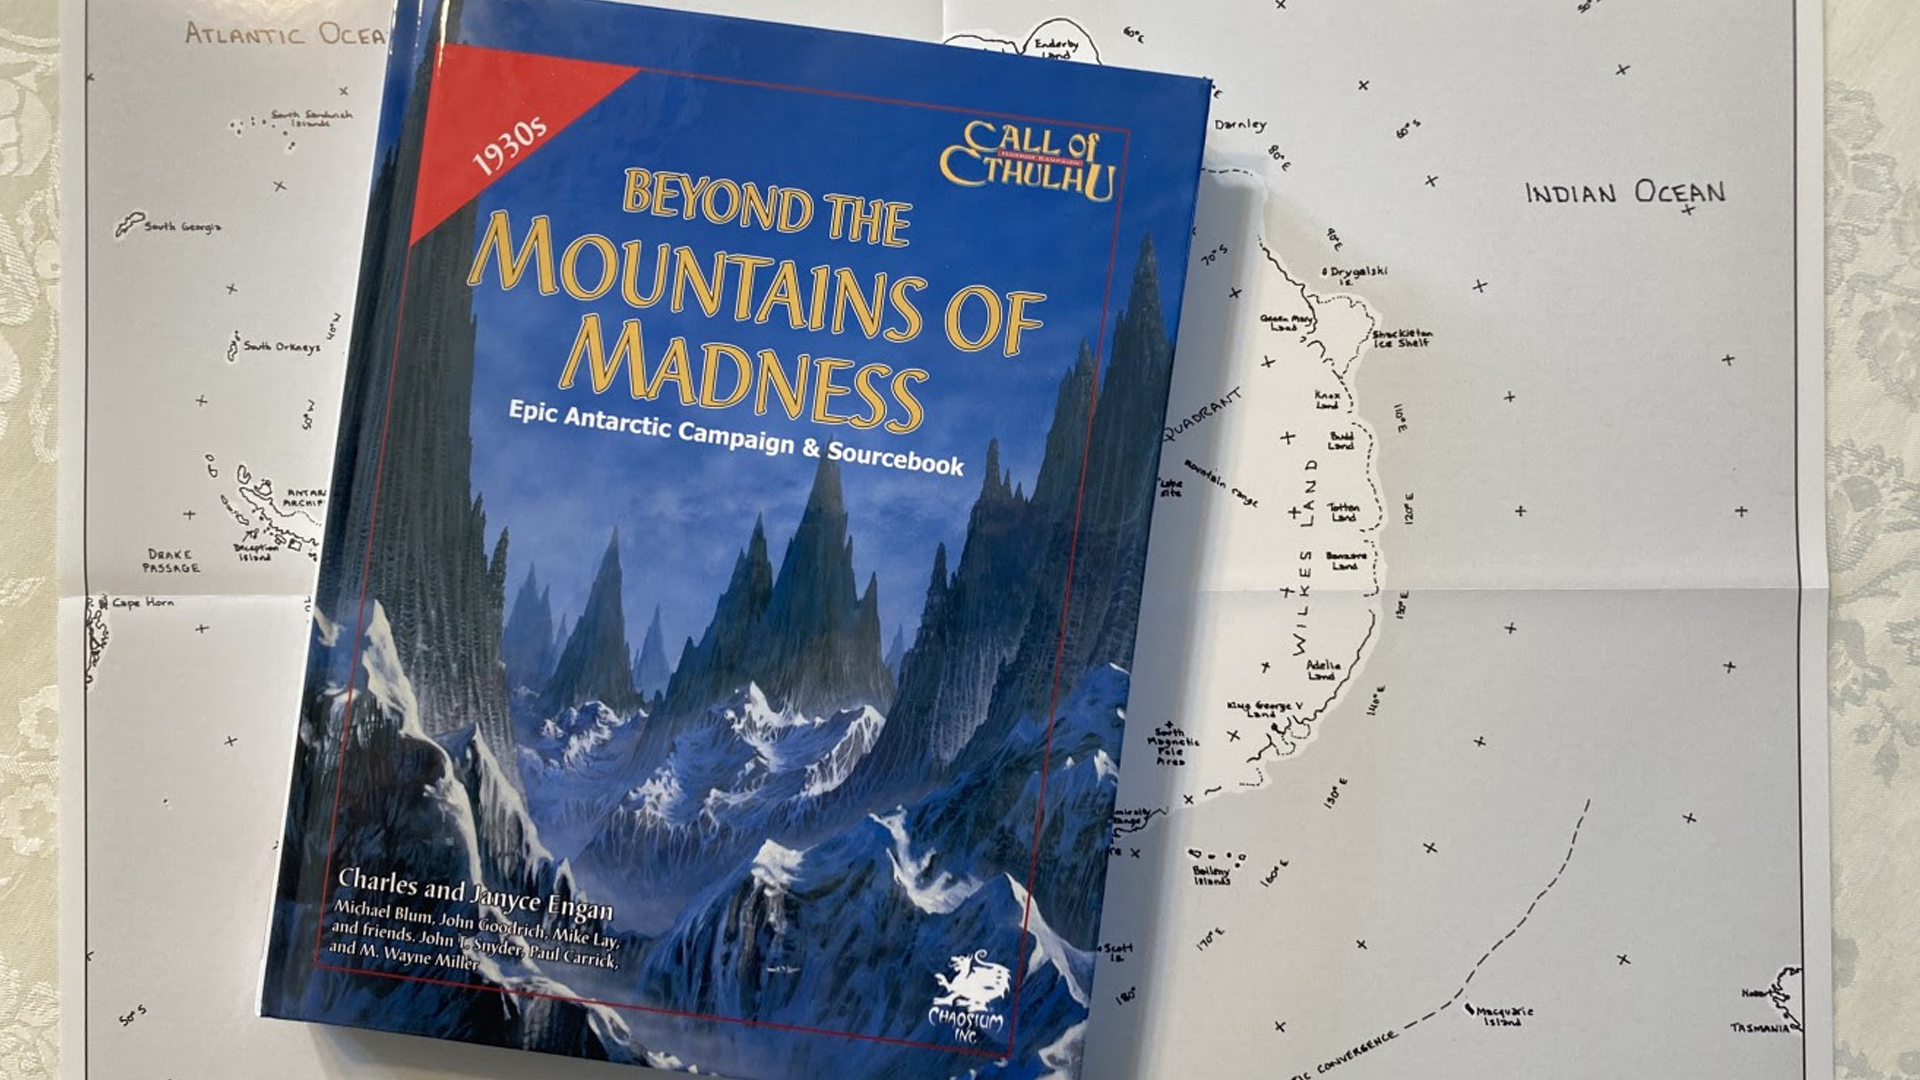 Beyond the Mountains of Madness book